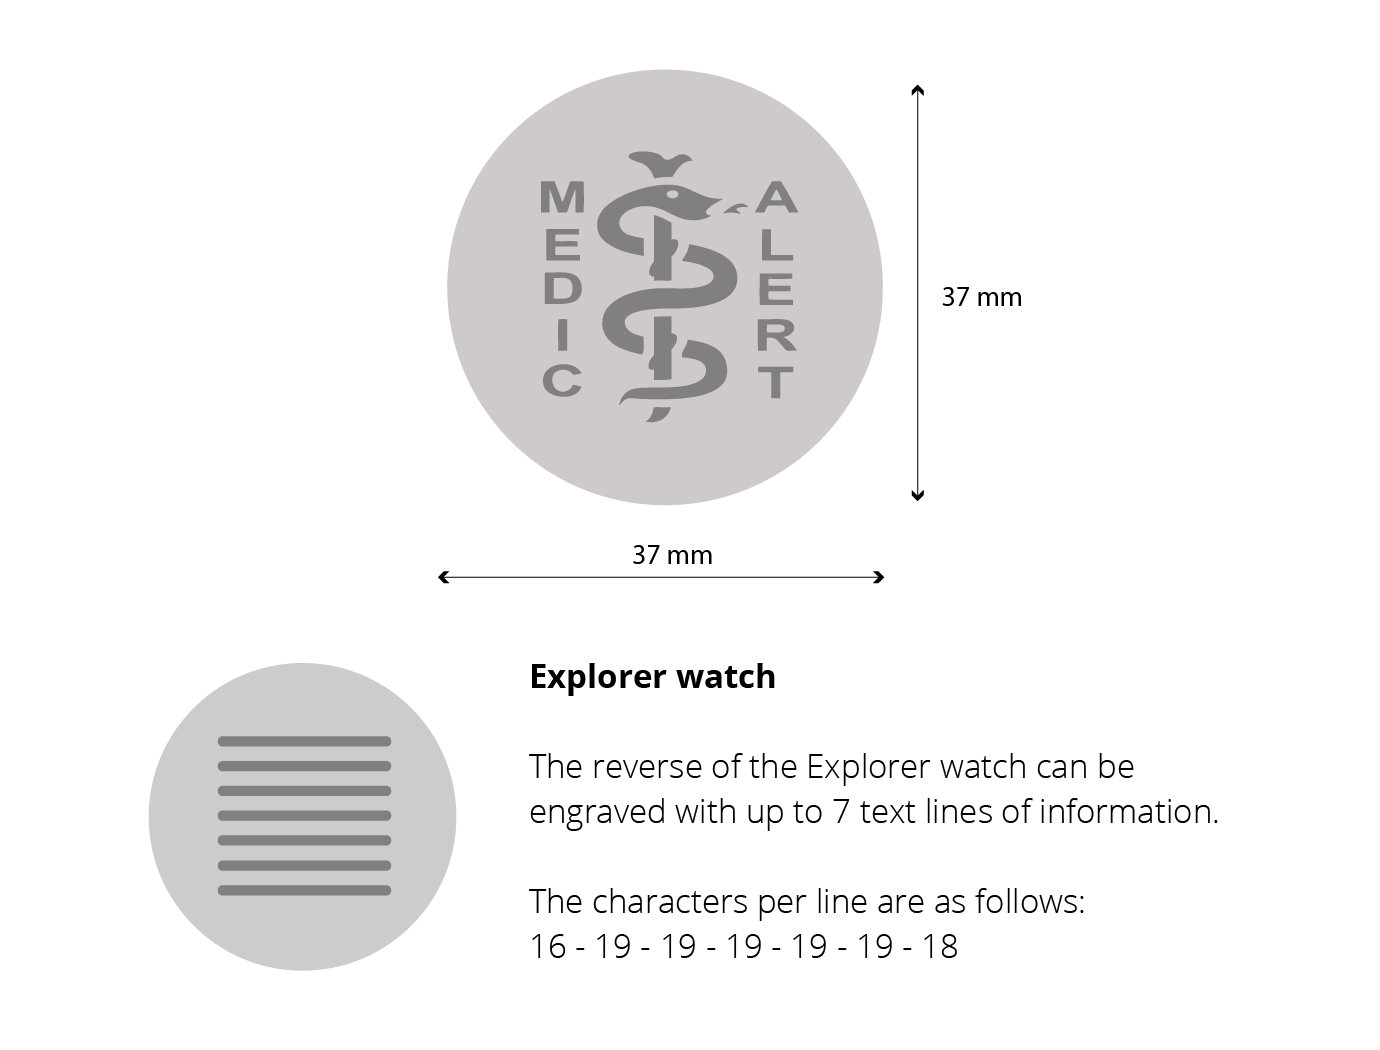 Diagram of the MedicAlert explorer watch with measurements and engraving specifications